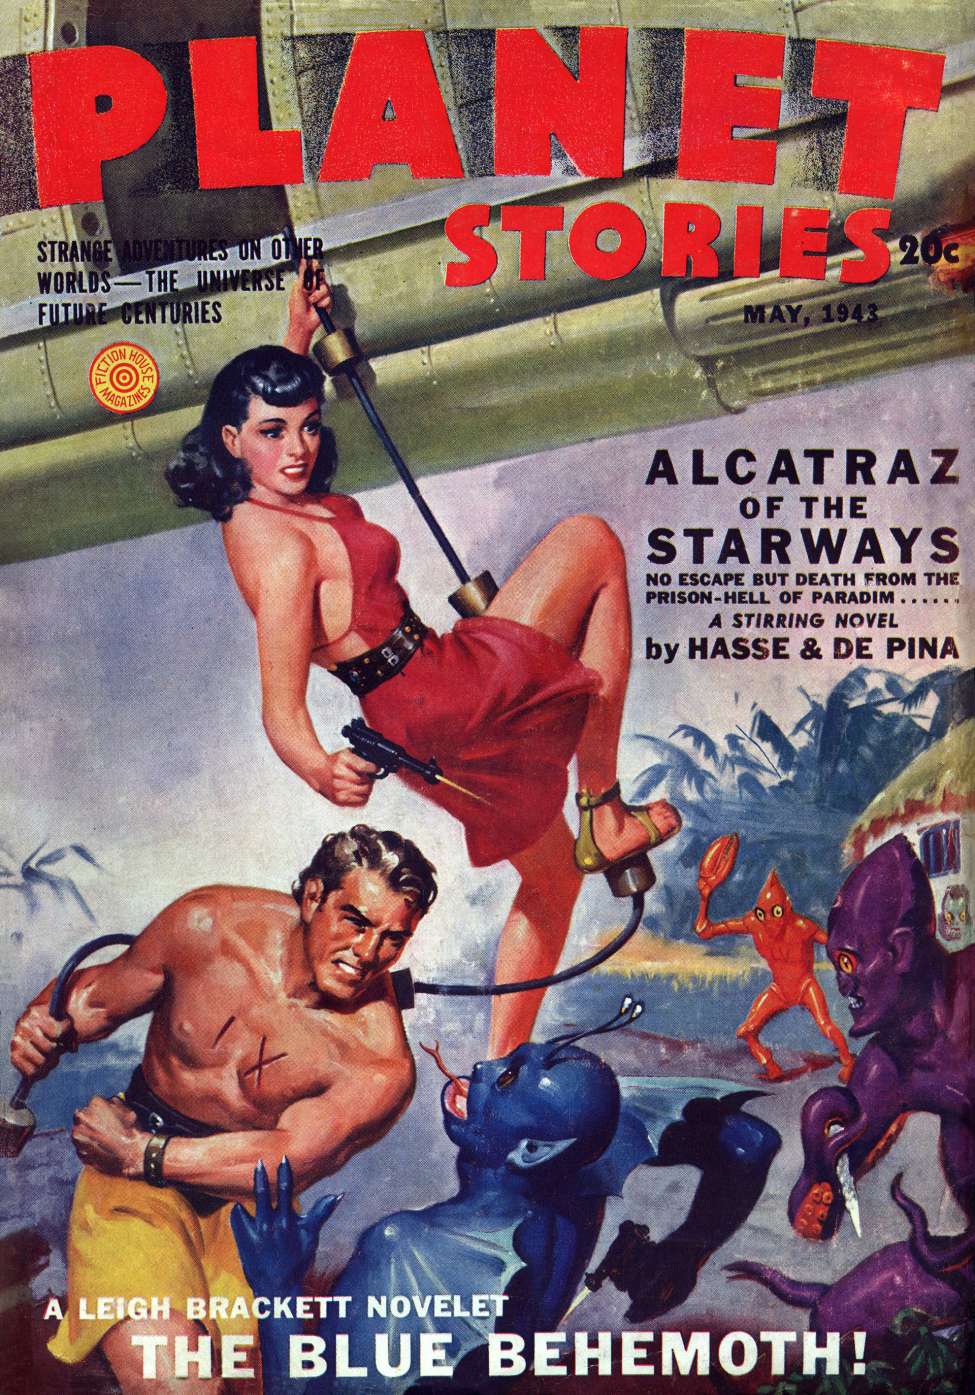 Book Cover For Planet Stories v2 3 - Alcatraz of the Starways - Albert dePina